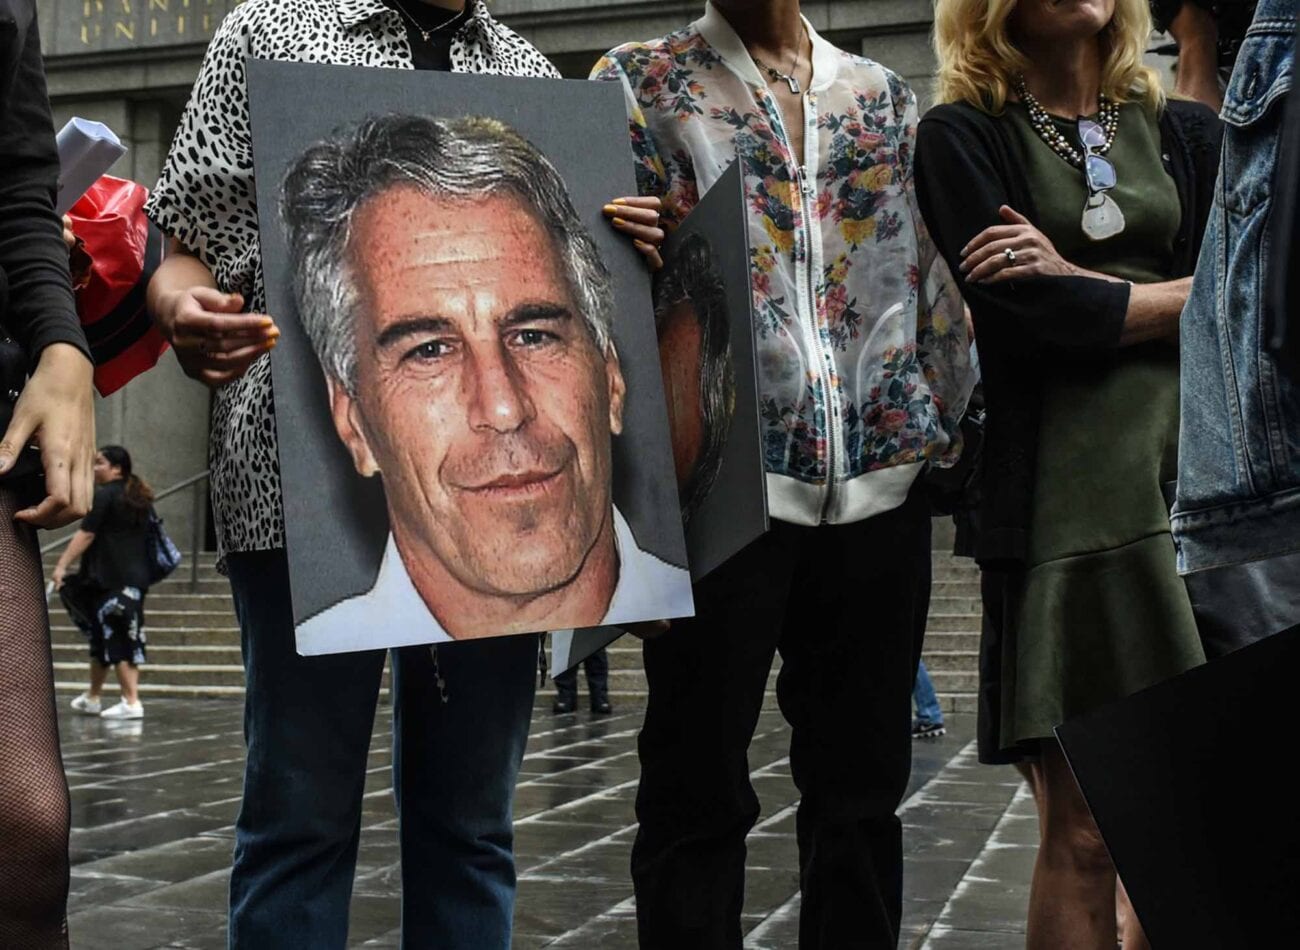 Was Jeffrey Epstein murdered? Among the conspiracy theories about who killed Jeffrey Epstein, these are the most popular.